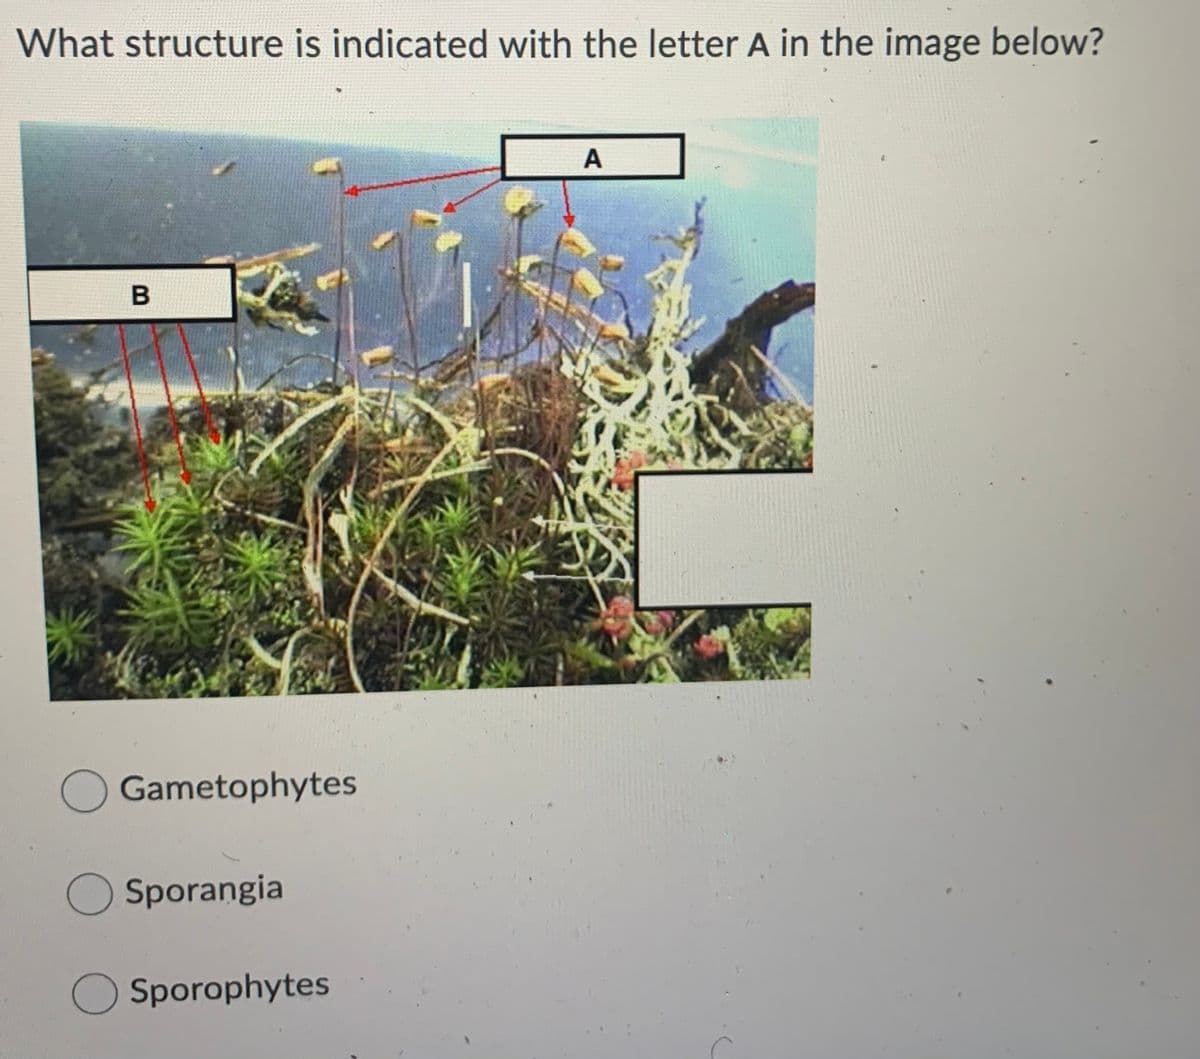 What structure is indicated with the letter A in the image below?
A
O Gametophytes
O Sporangia
O Sporophytes
